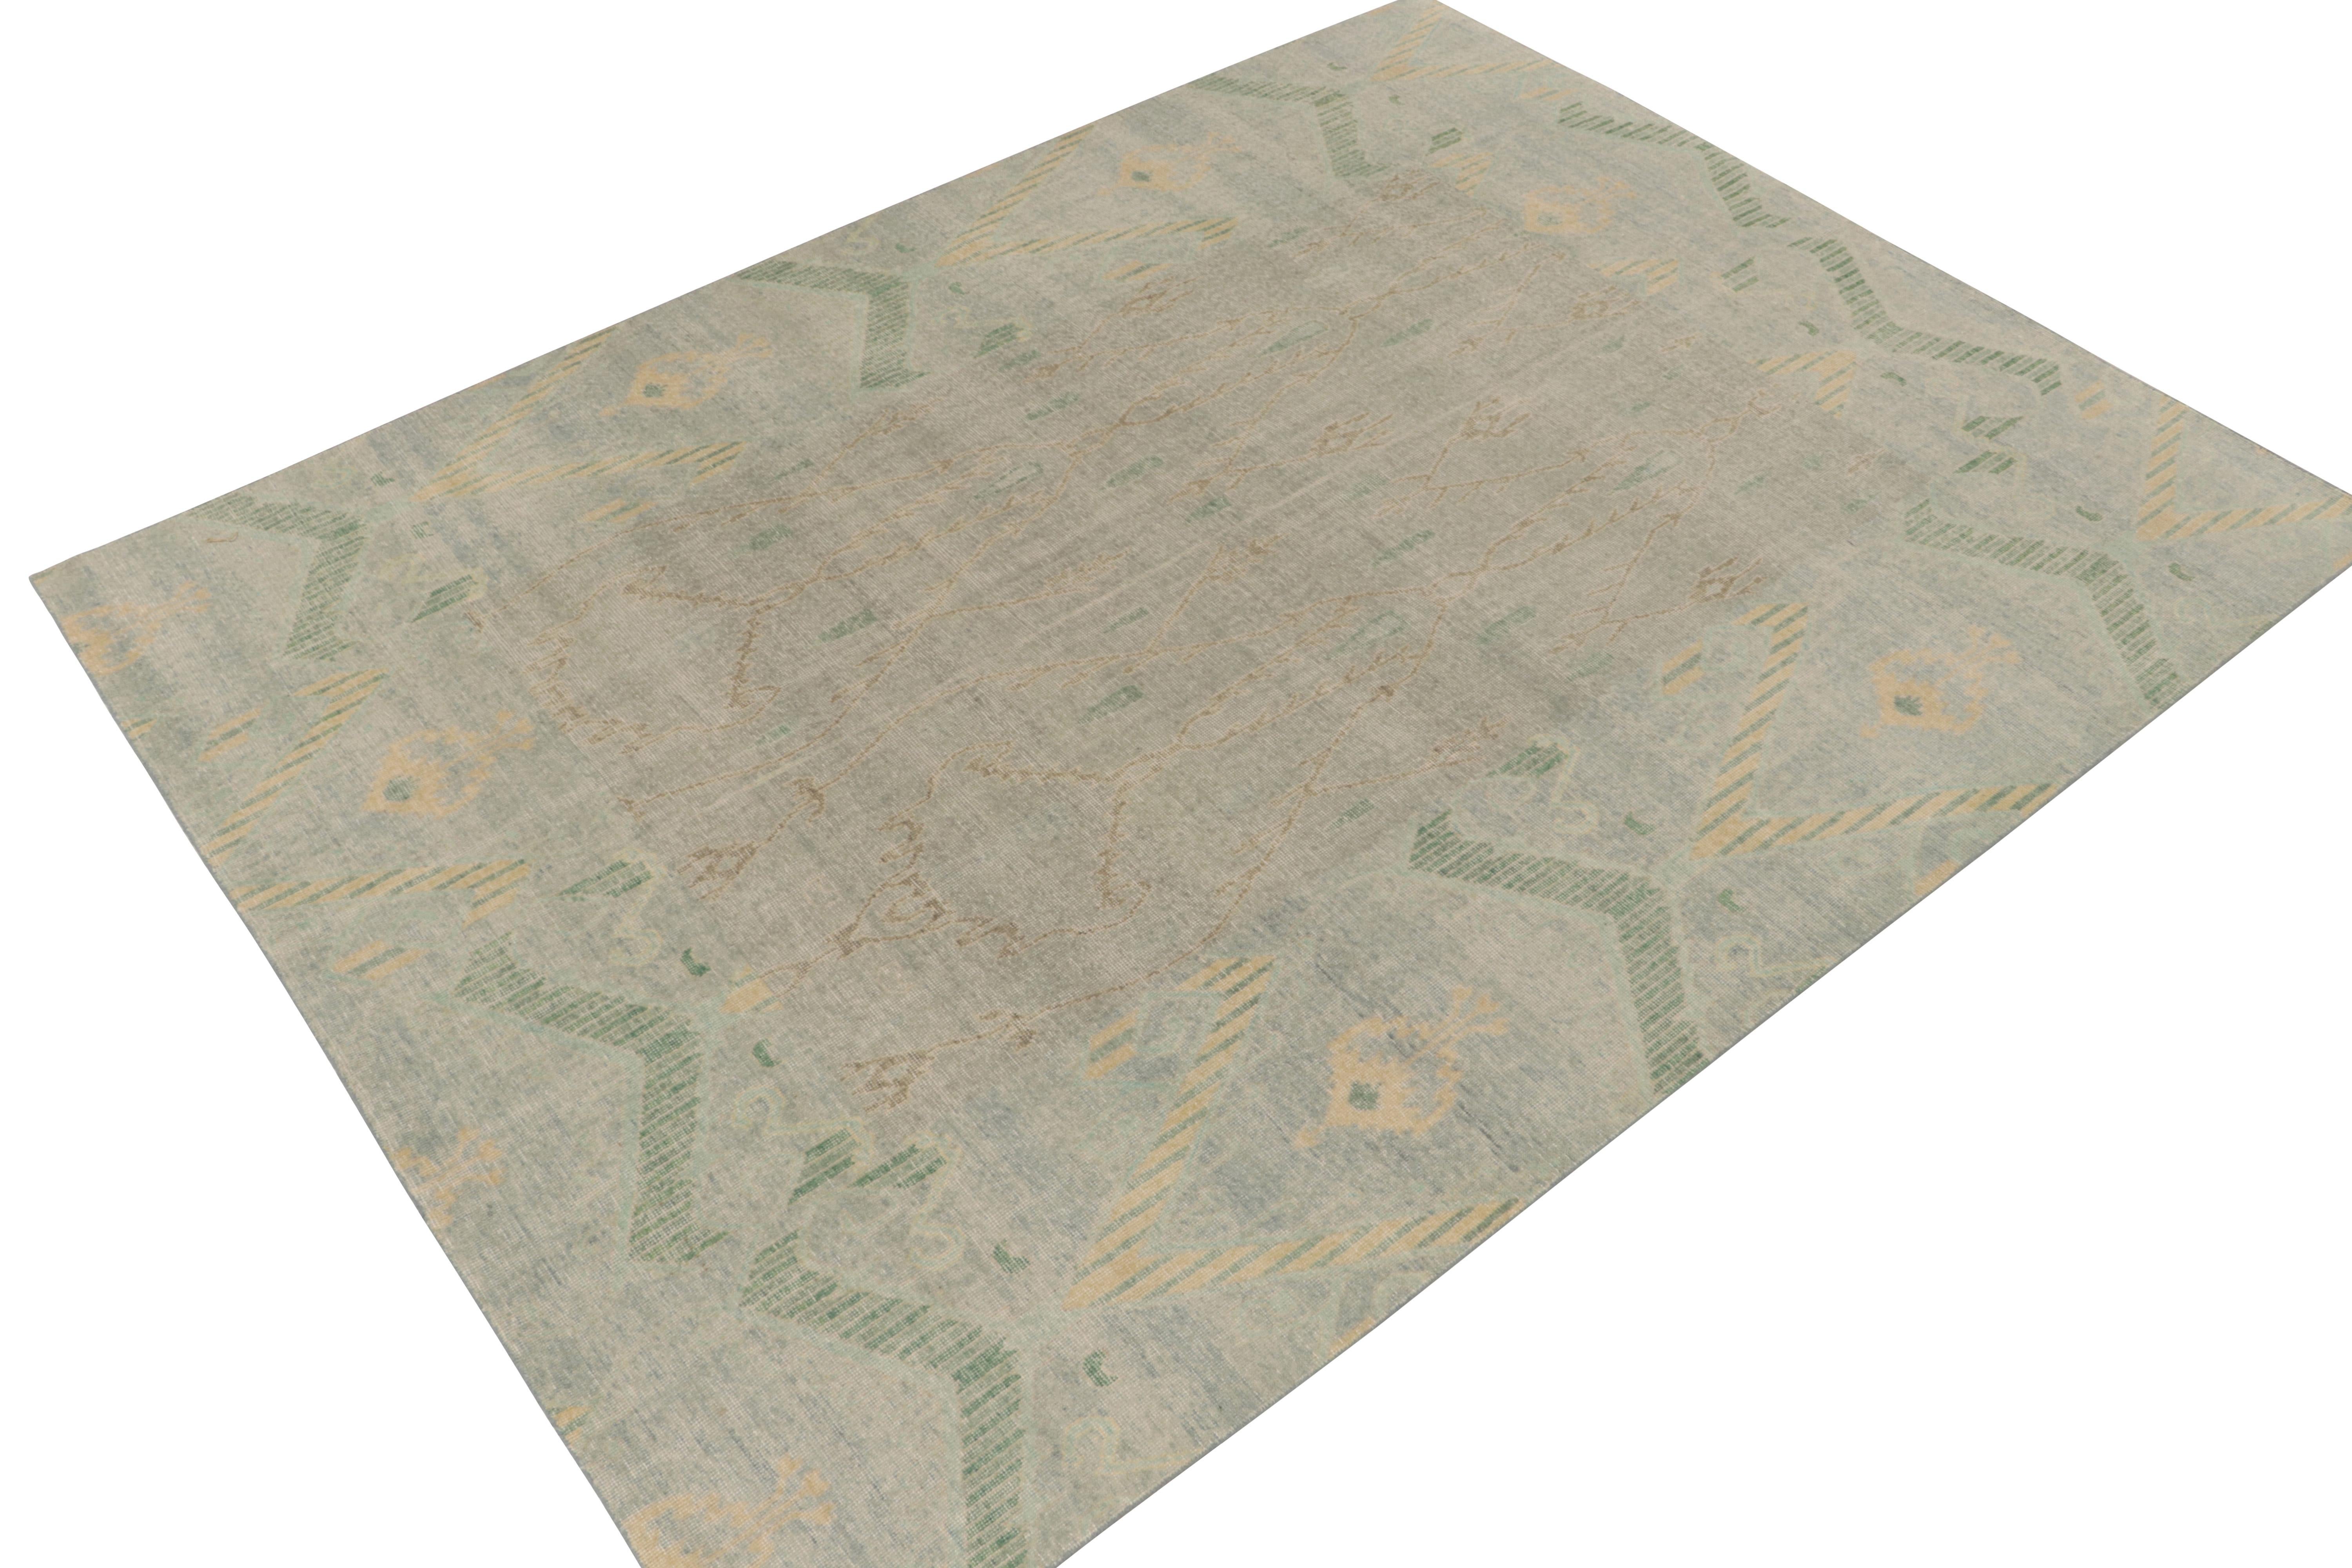 Belonging to our Homage collection, a 9x12 hand-knotted rug enjoying a beautiful calm personality with unique colorway & graph. The distressed vision manifests with sublime patterns inspired by classic Ikat patterns in light blue, forest green &